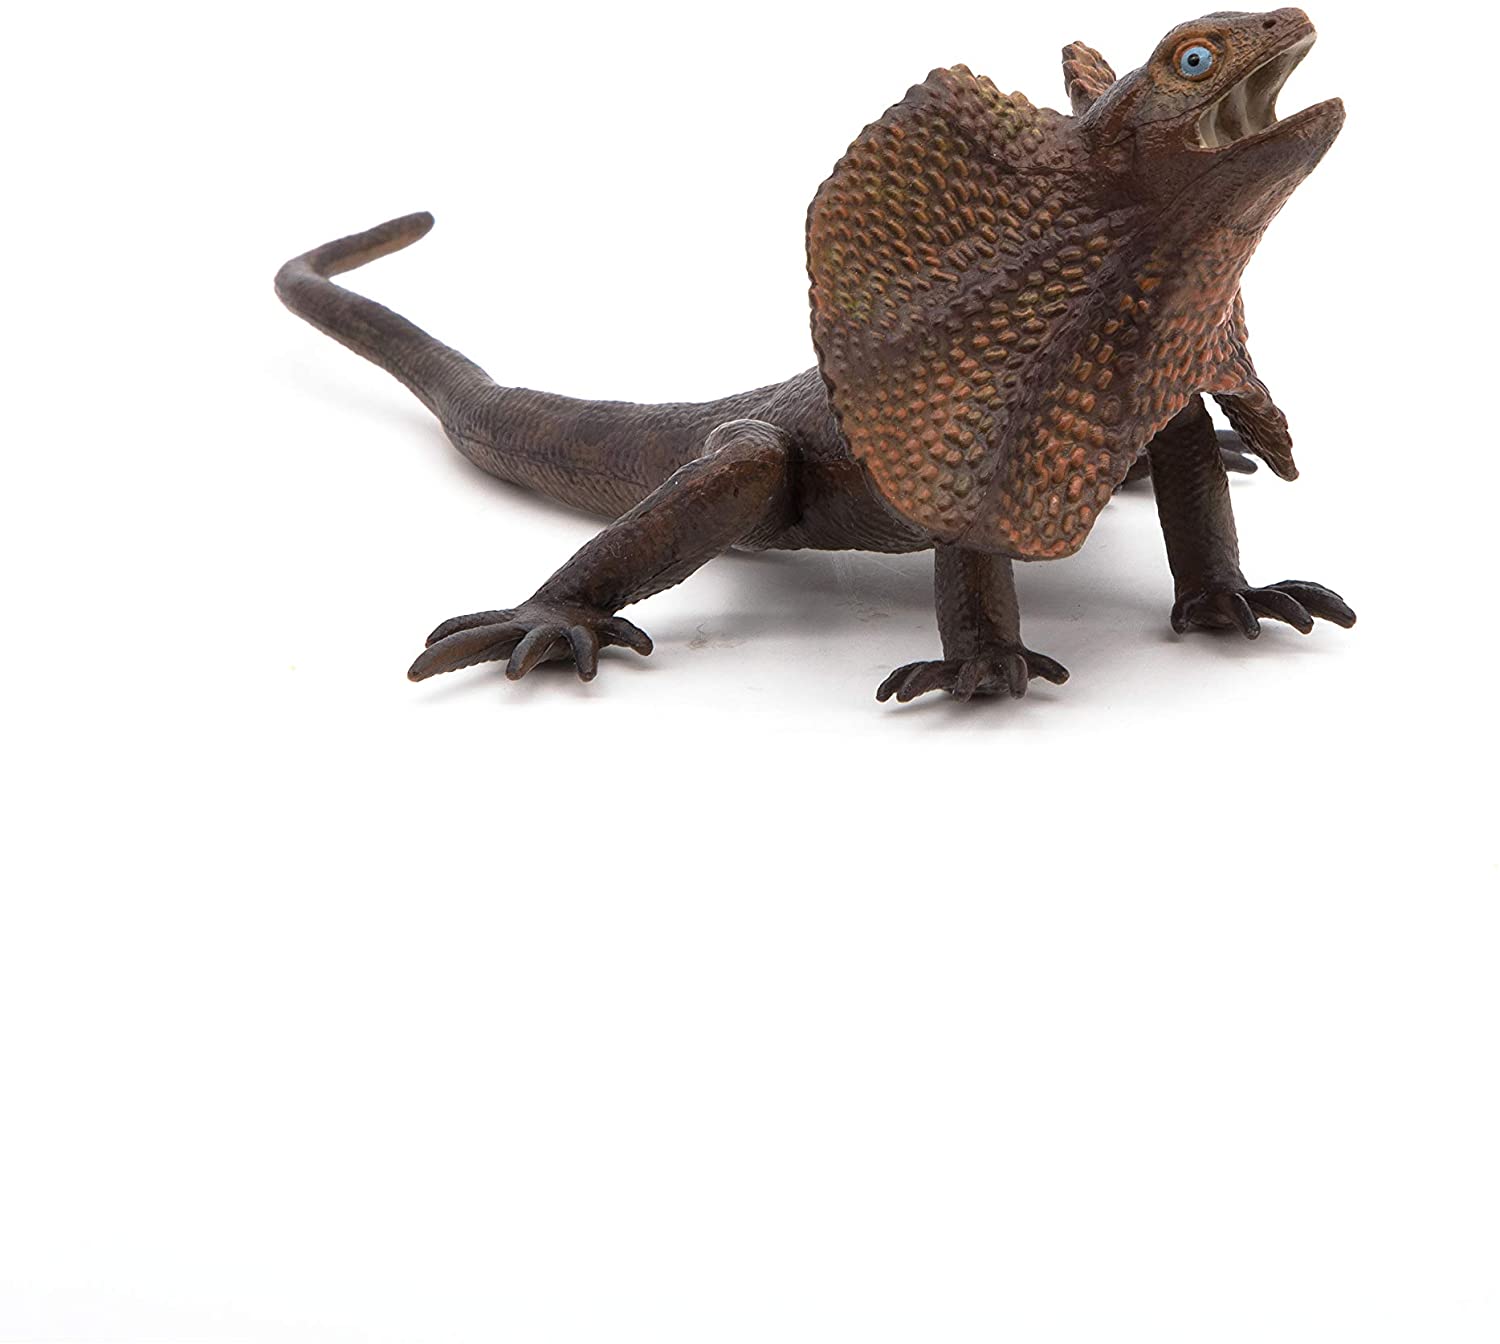 FREE SHIPPINGAAA 22243 Frilled Lizard Toy Australian Reptile New in Package 